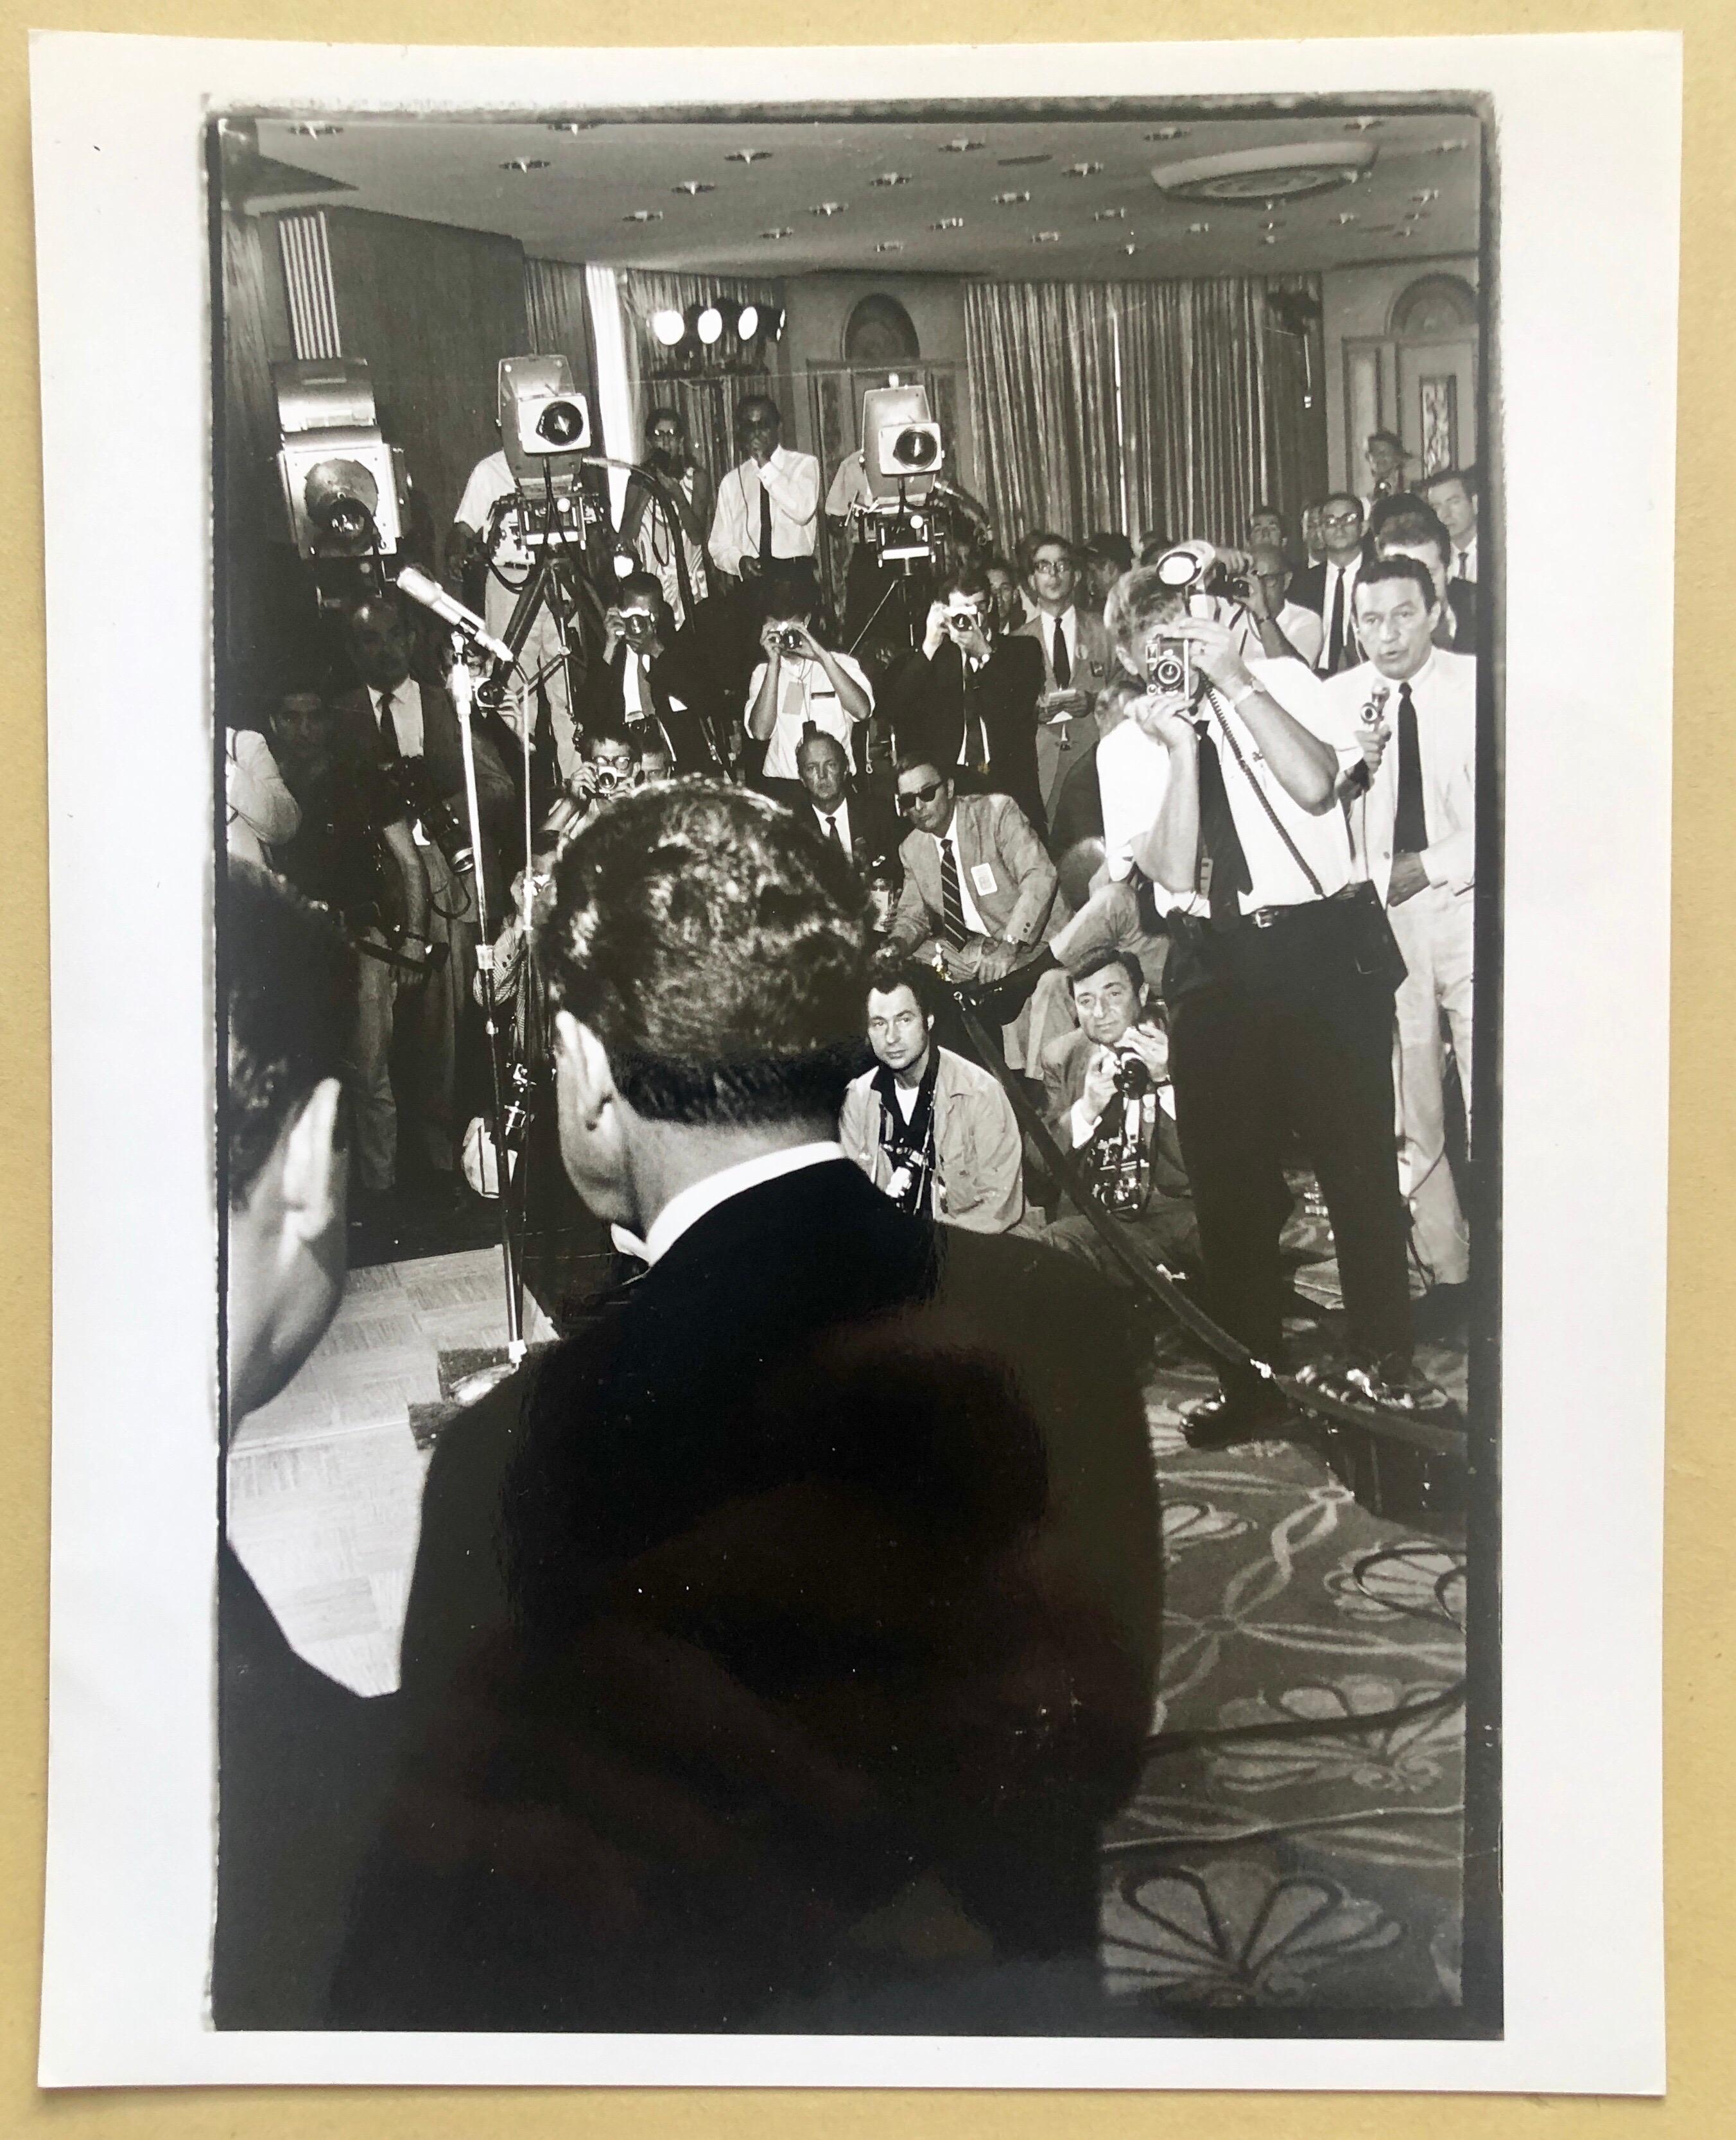 Photograph signed in ink and with photographer stamp verso and hand written title.
Nixon meets the press, Republican convention Miami Beach 1968
Richard Milhous Nixon (January 9, 1913 – April 22, 1994) was the 37th president of the United States